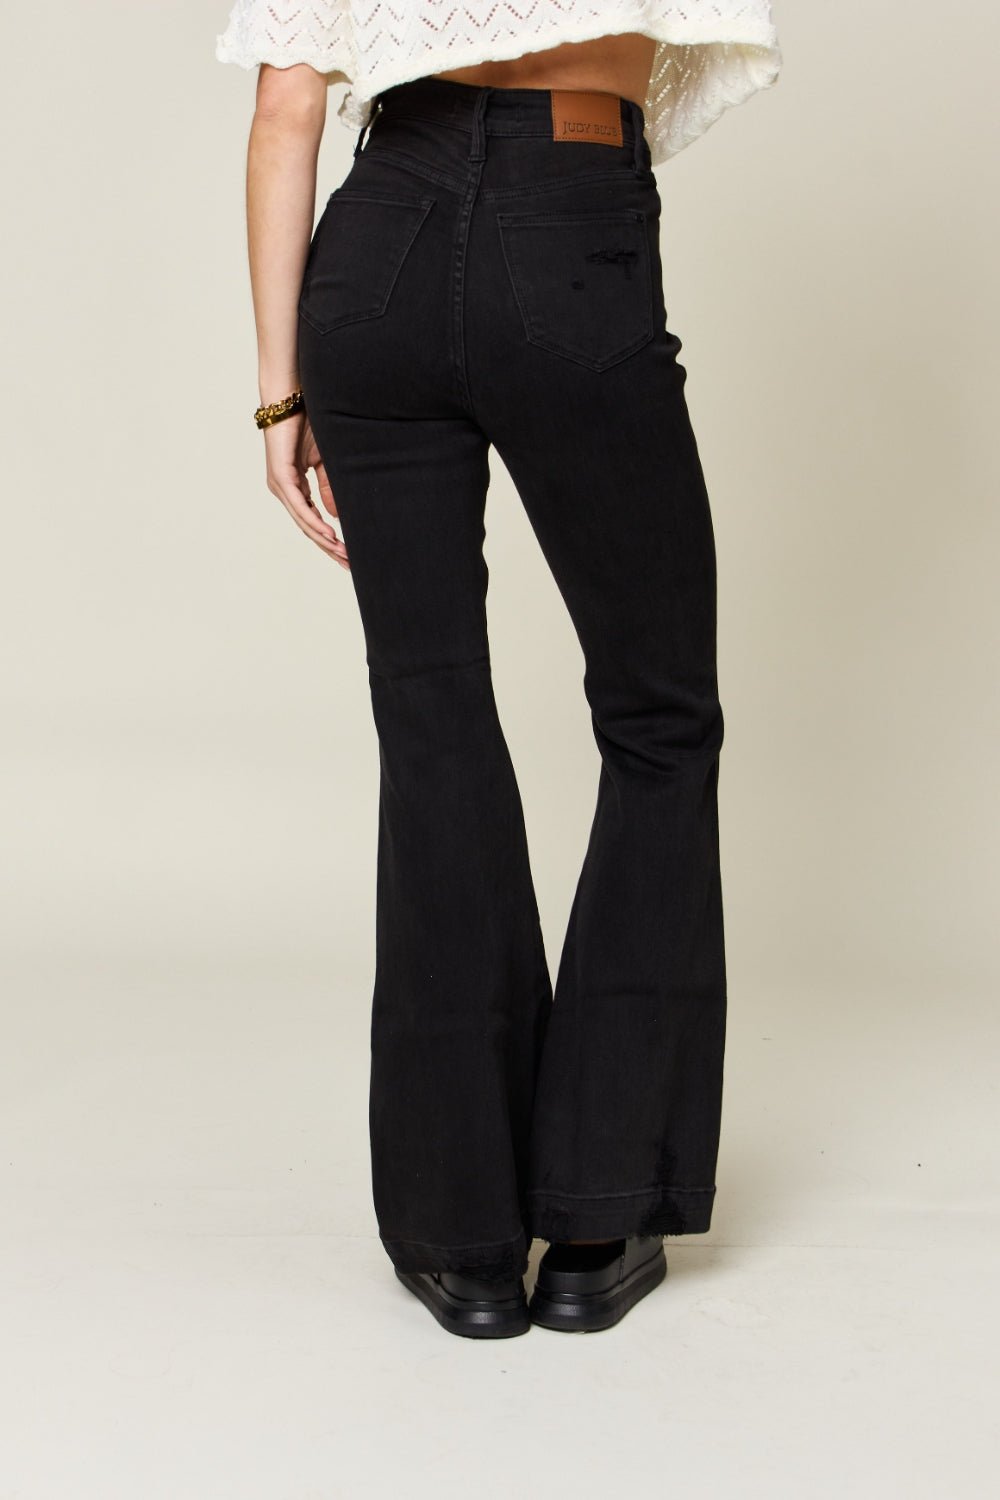 Plus Size High Waist Distressed Flare Jeans Pants Muses Of Bohemia   